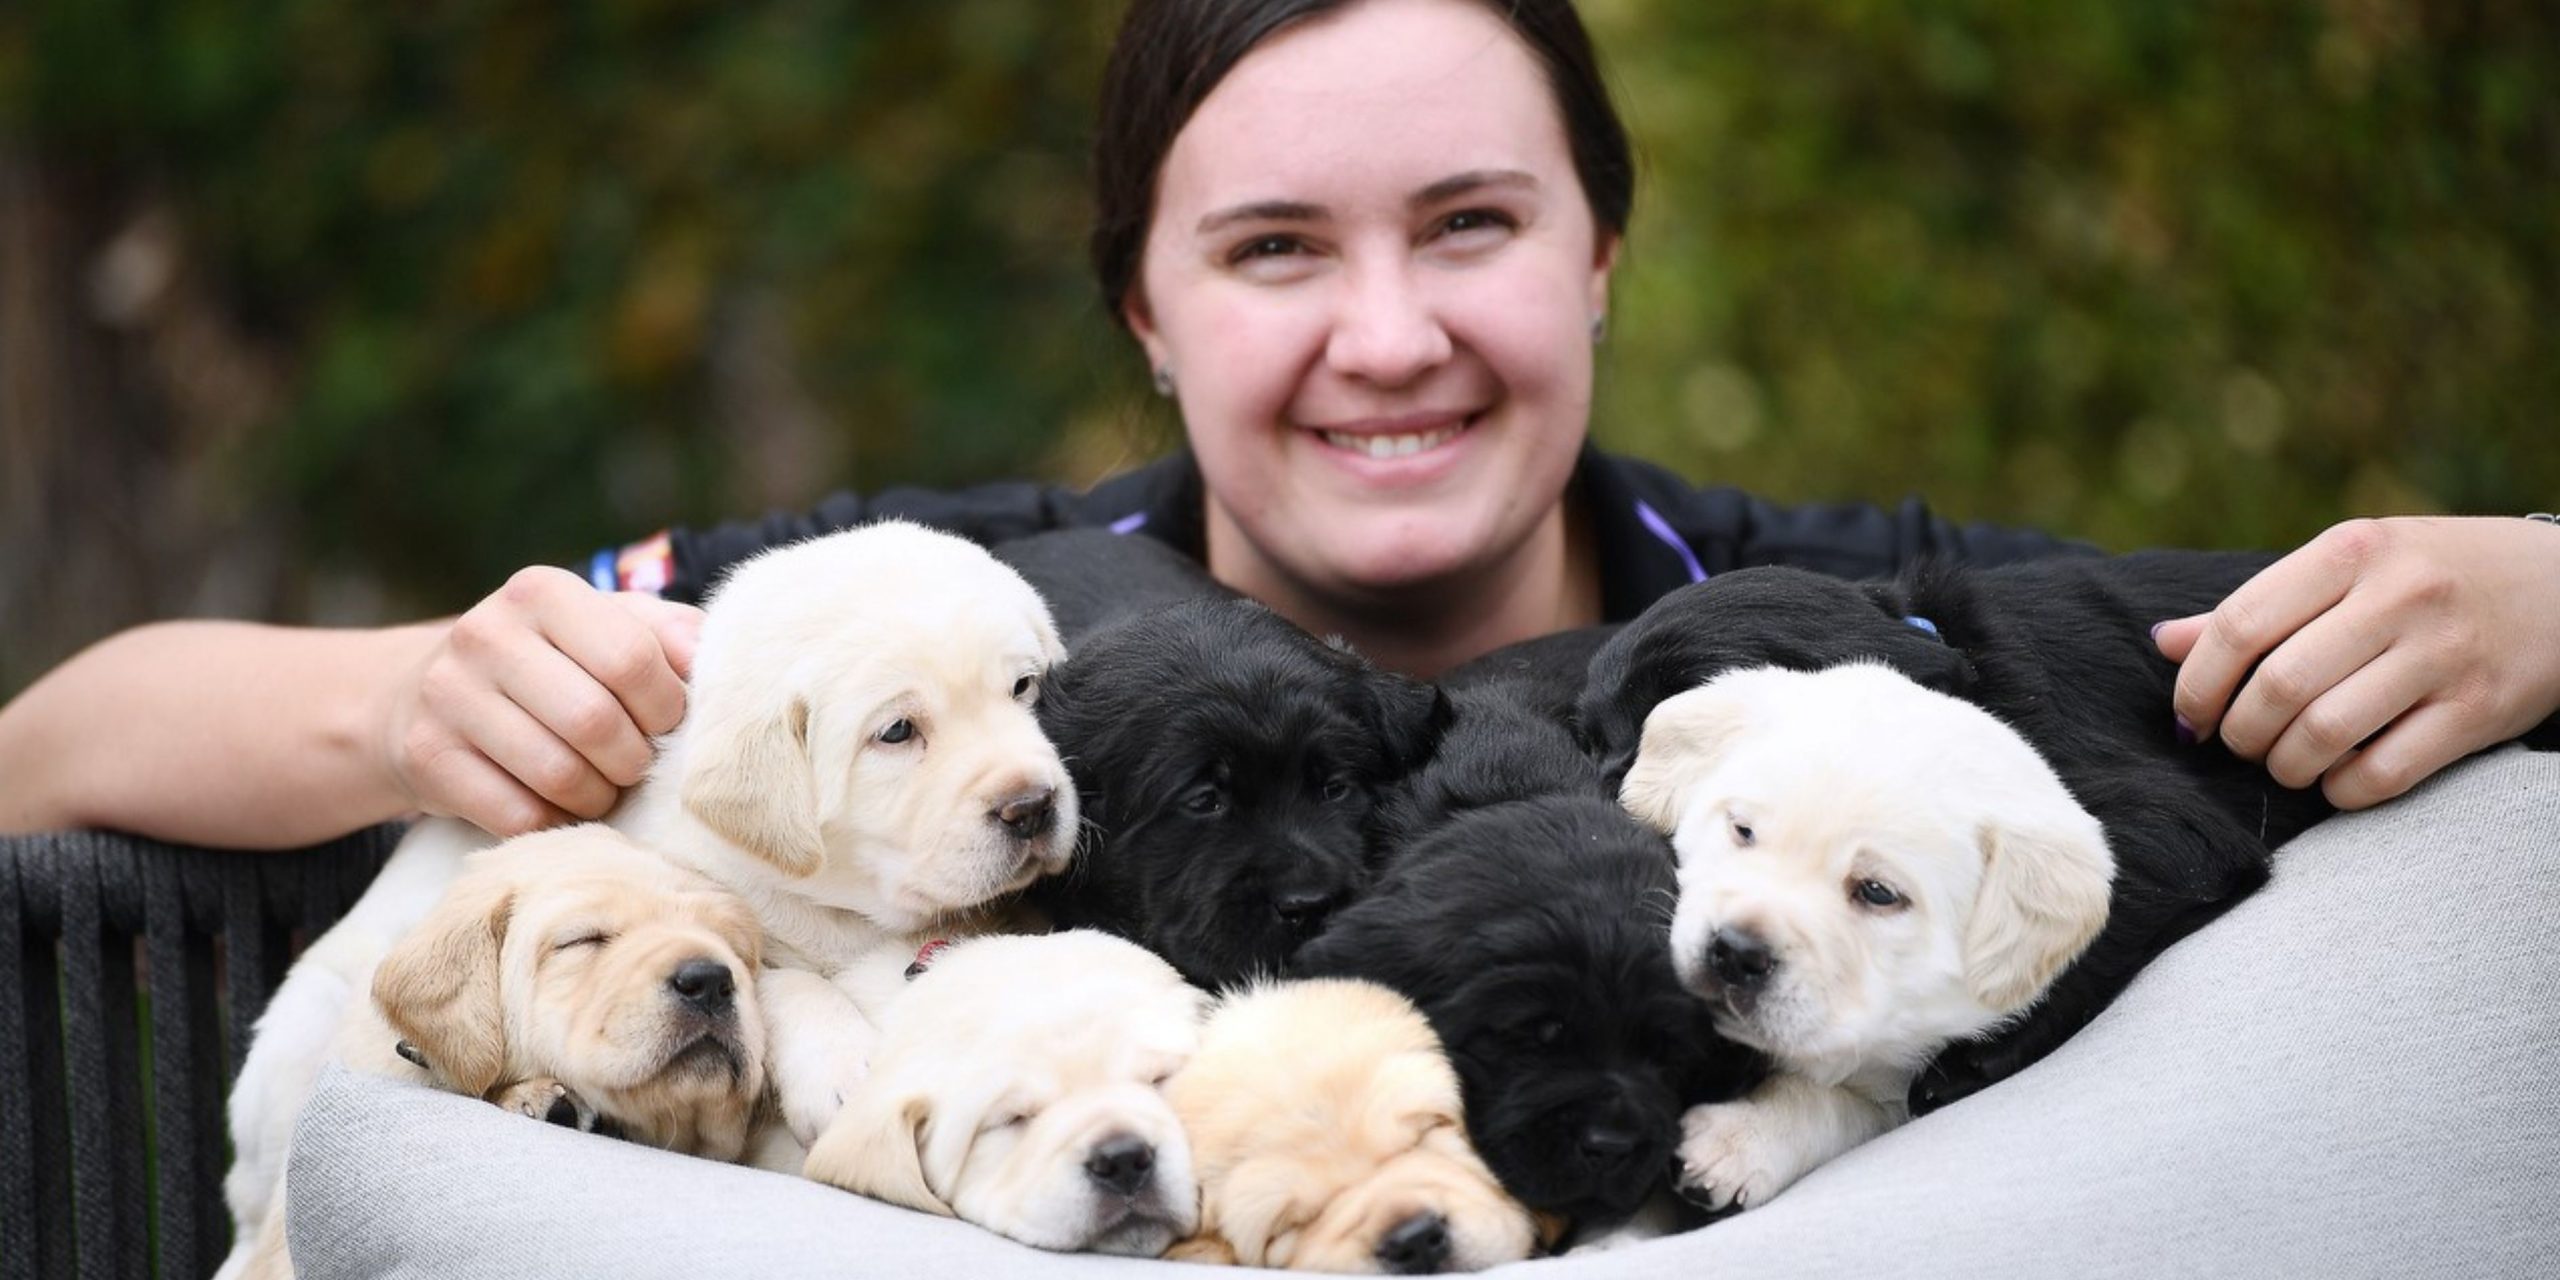 Five yellow puppies and two black puppies in a dog bed. Young woman smiling at camera behind with her arms on each side of the puppies.